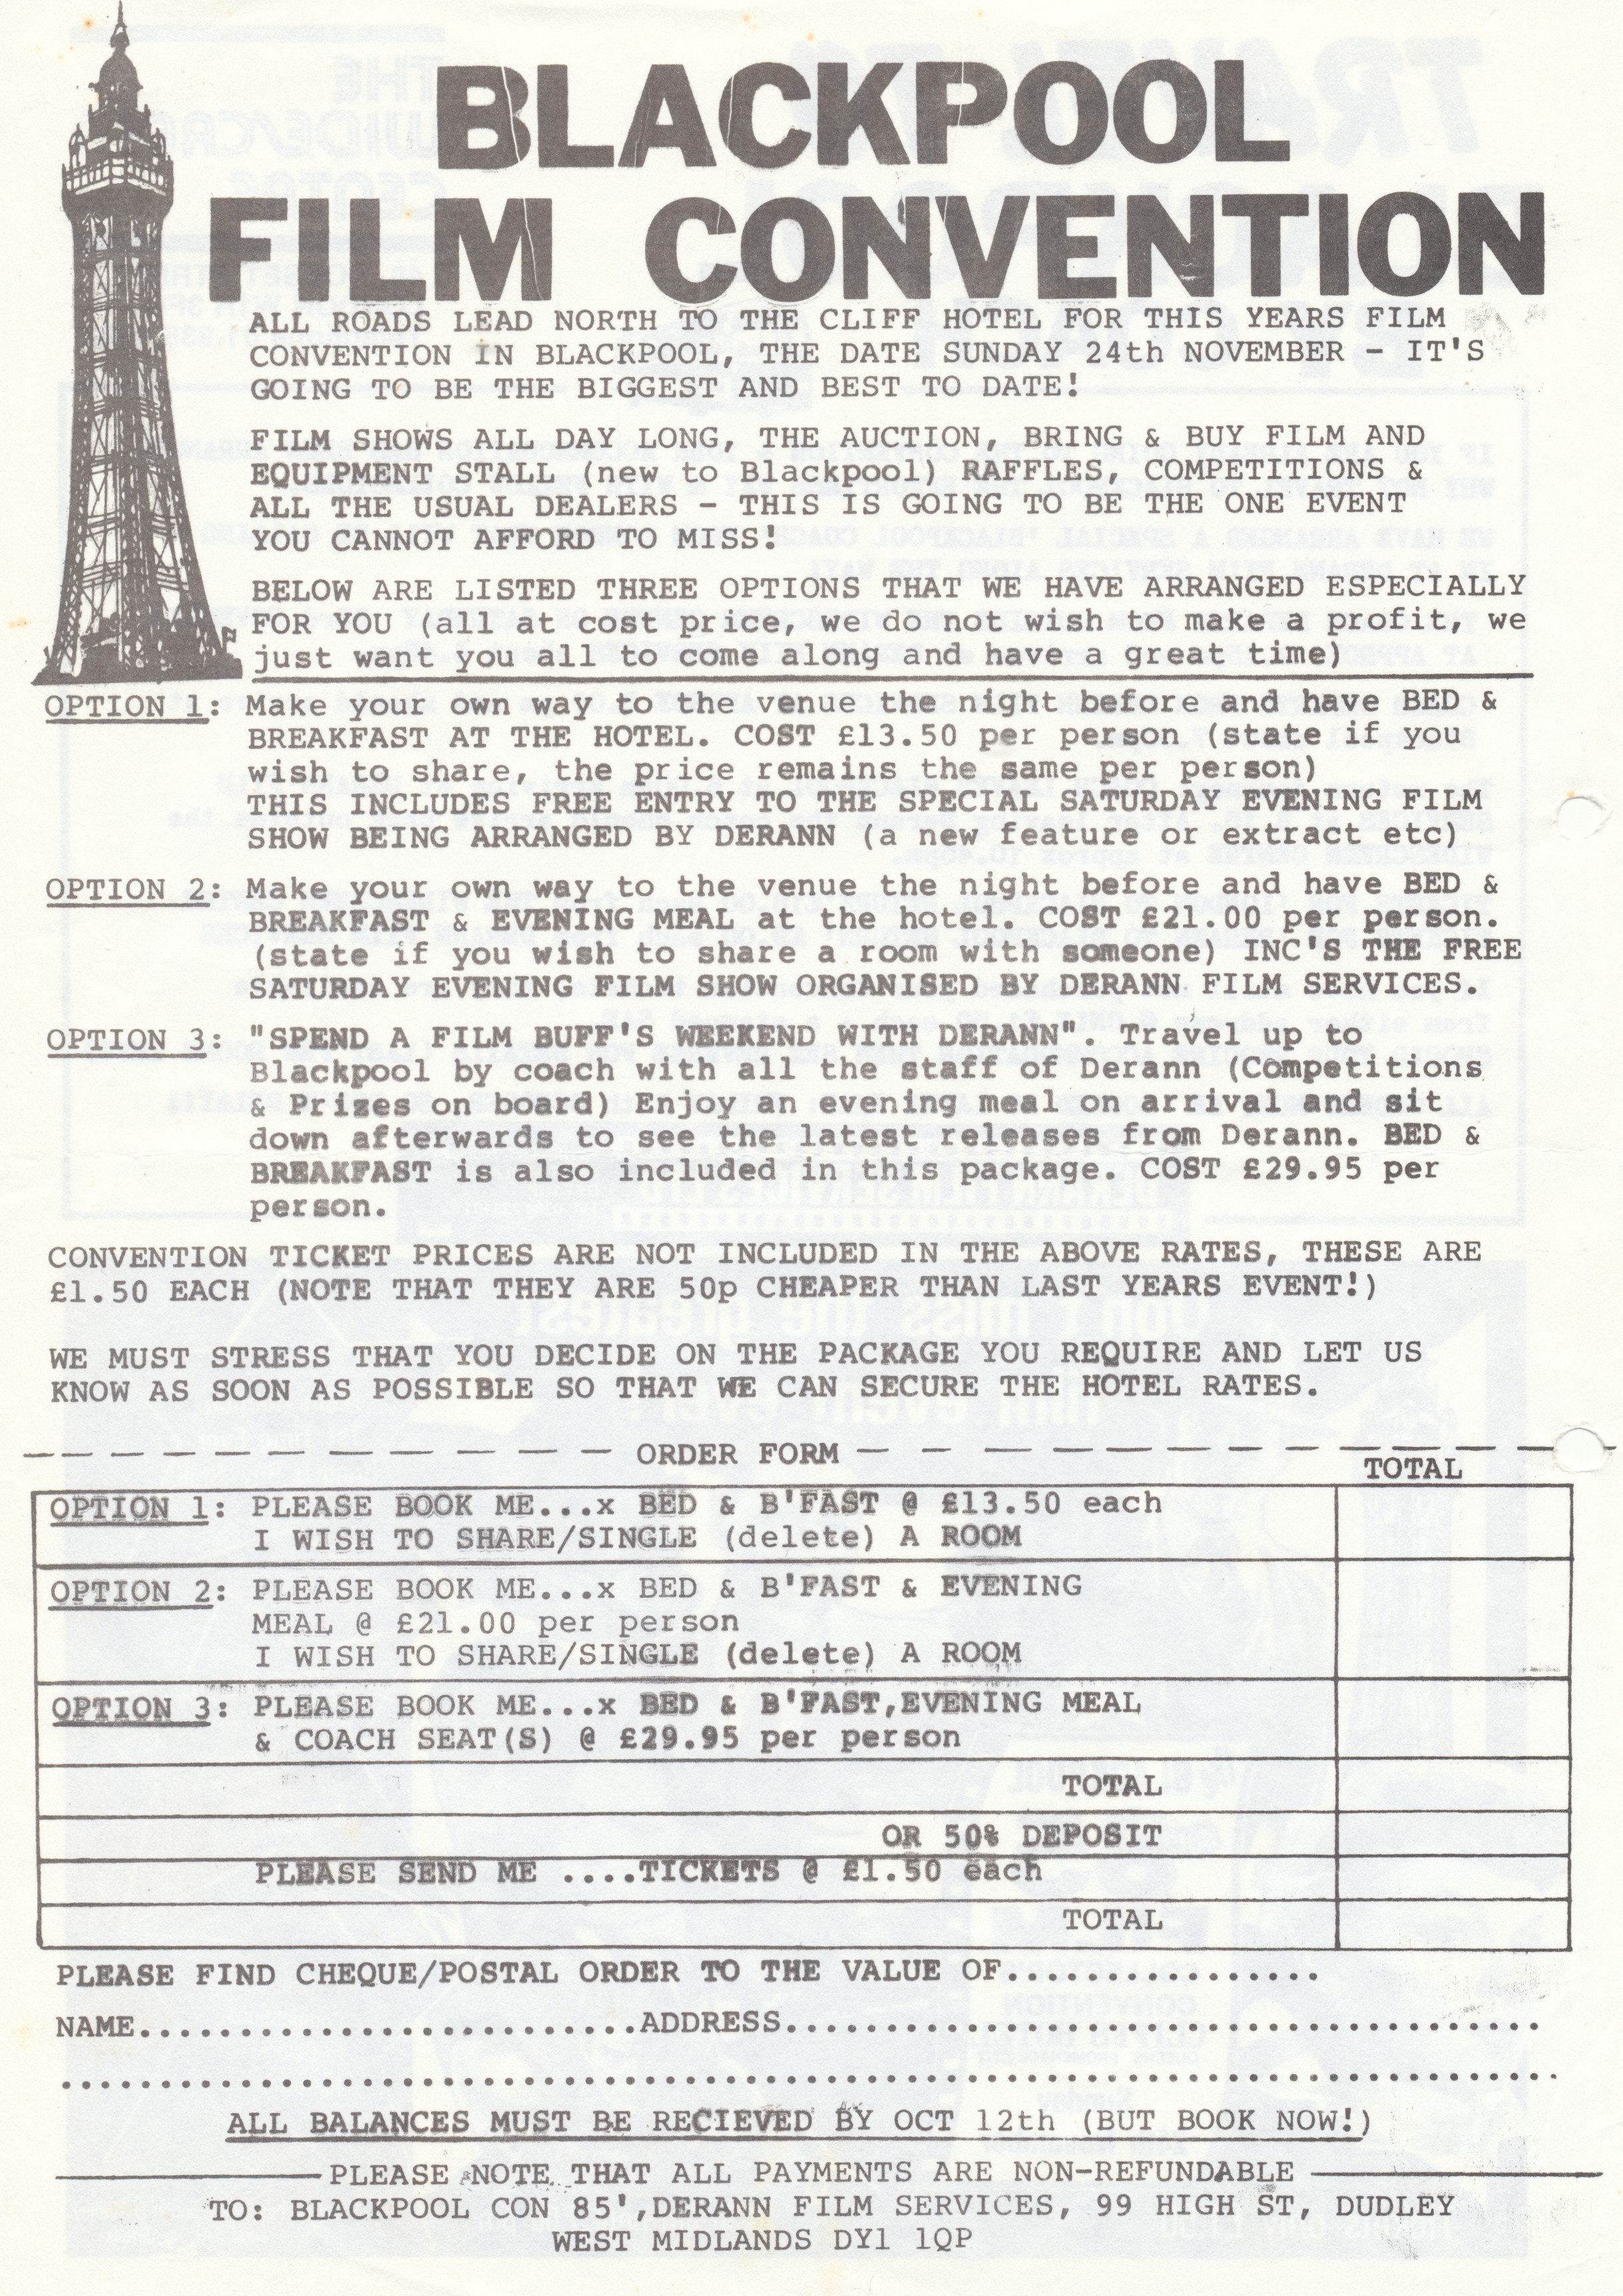 1985 Convention booking form